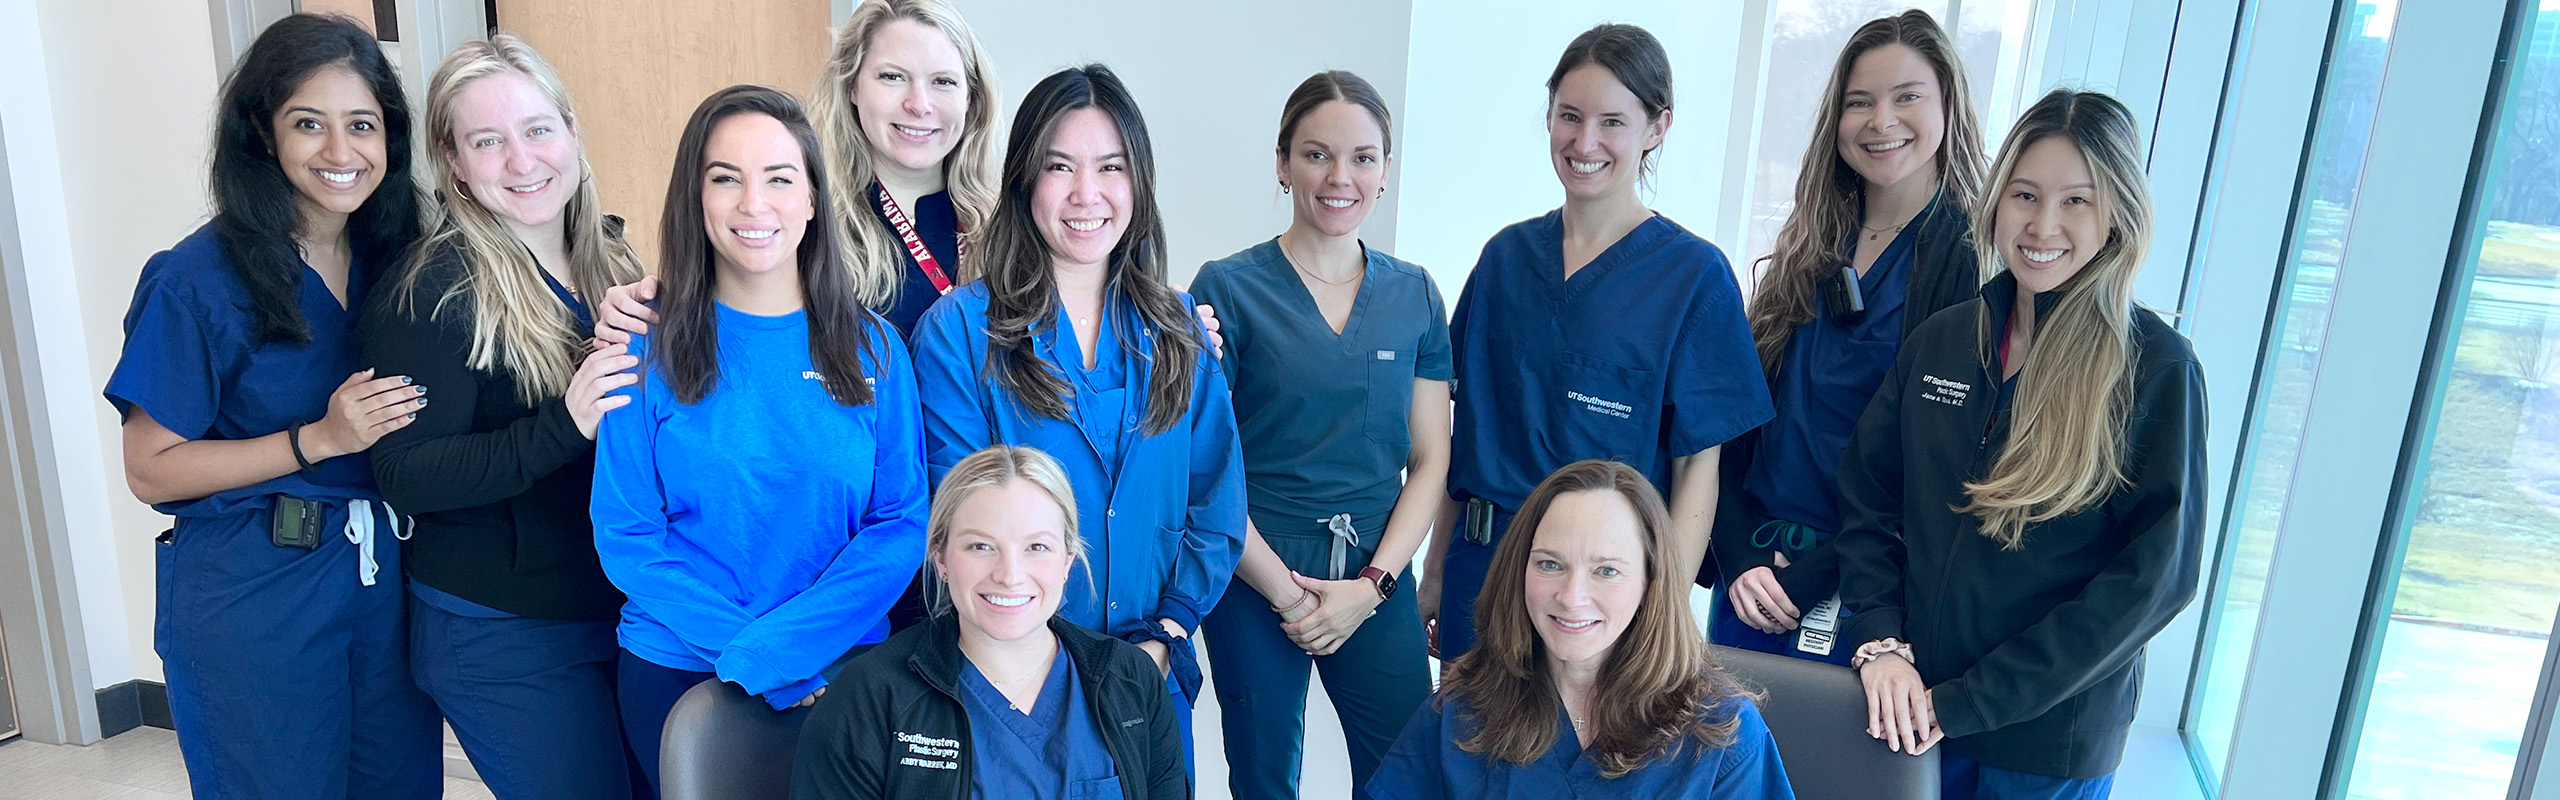 A group of women from the Plastic Surgery Team wearing UT Southwestern Medical Center uniforms, scrubs and jackets.